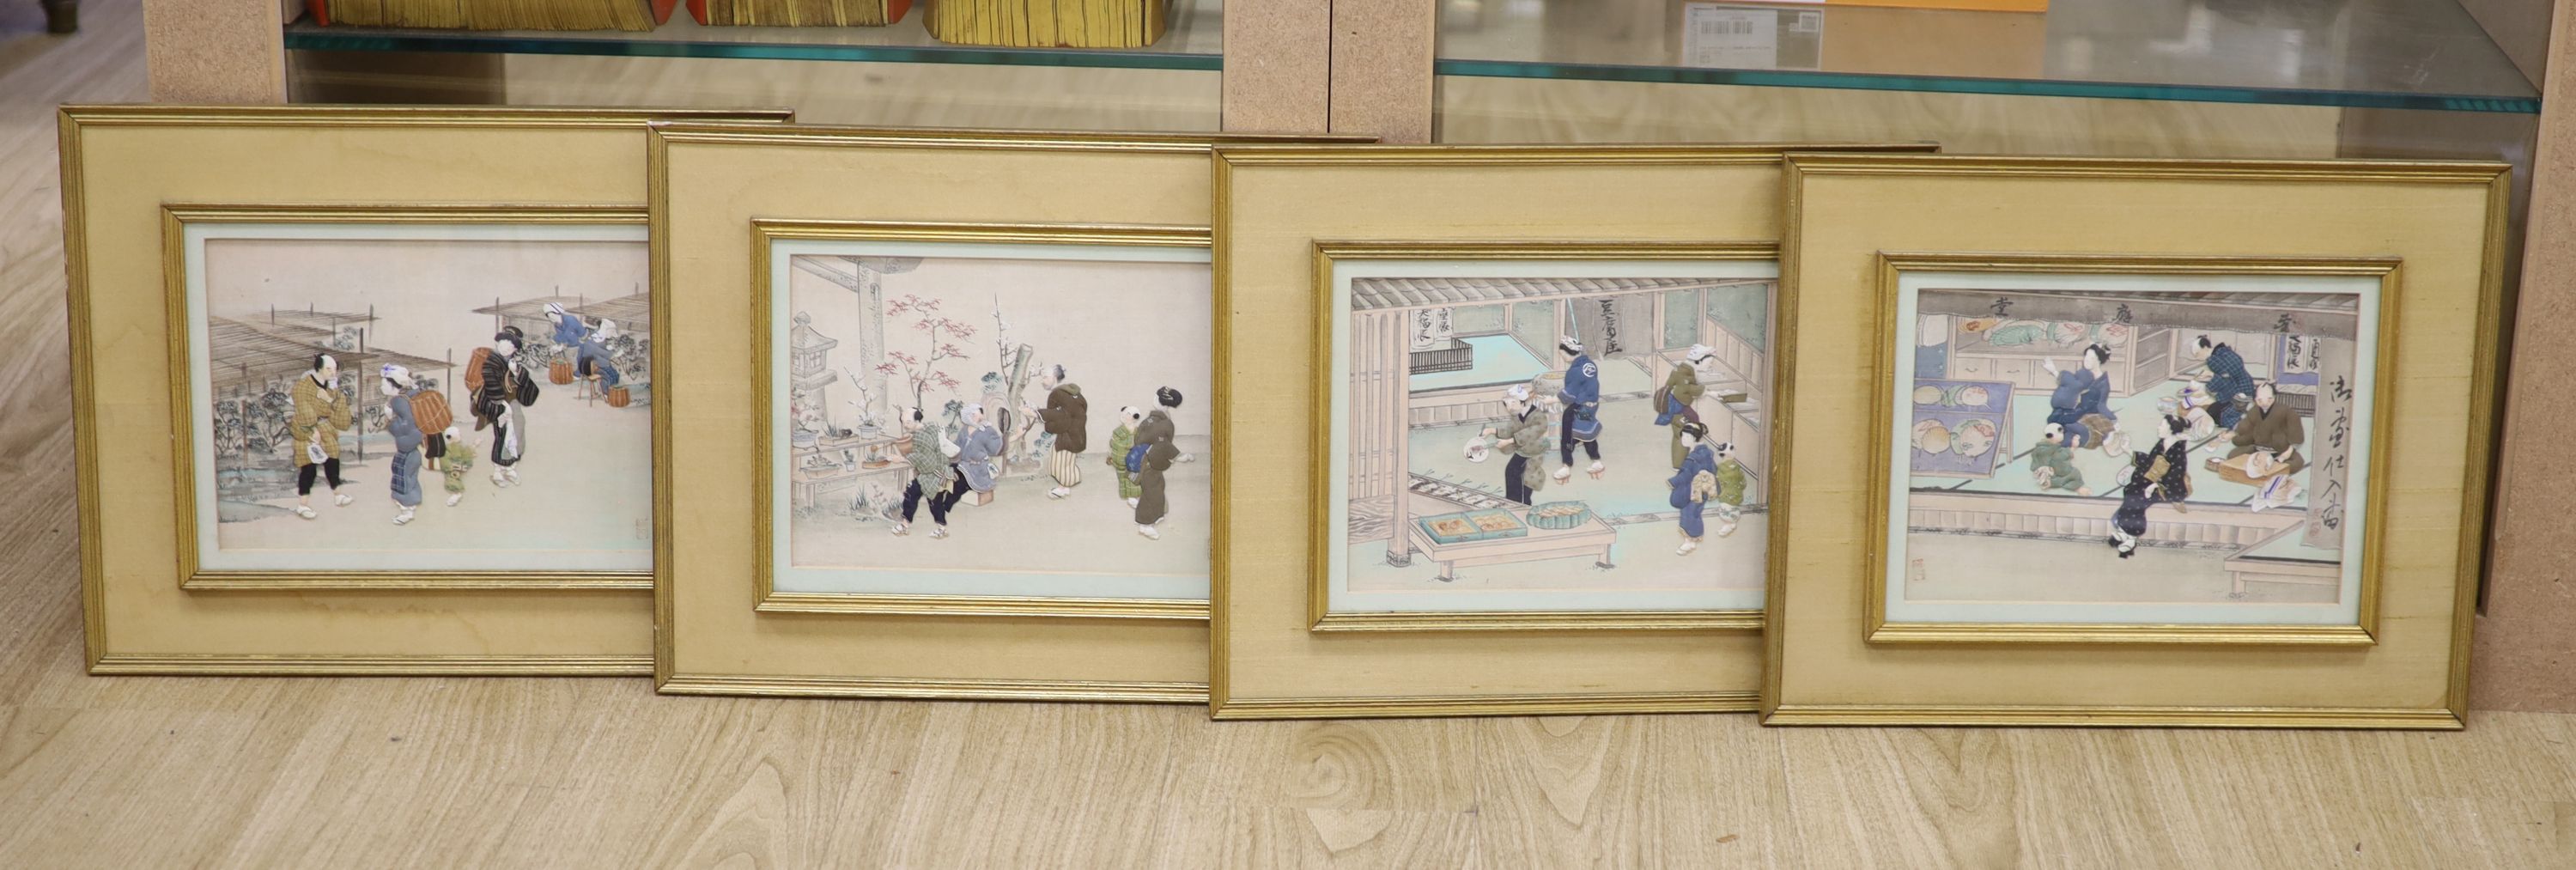 A set of four Chinese or Korean painted fabric collages, circa 1950, depicting interiors scenes with figures, framed, 19 x 26cm